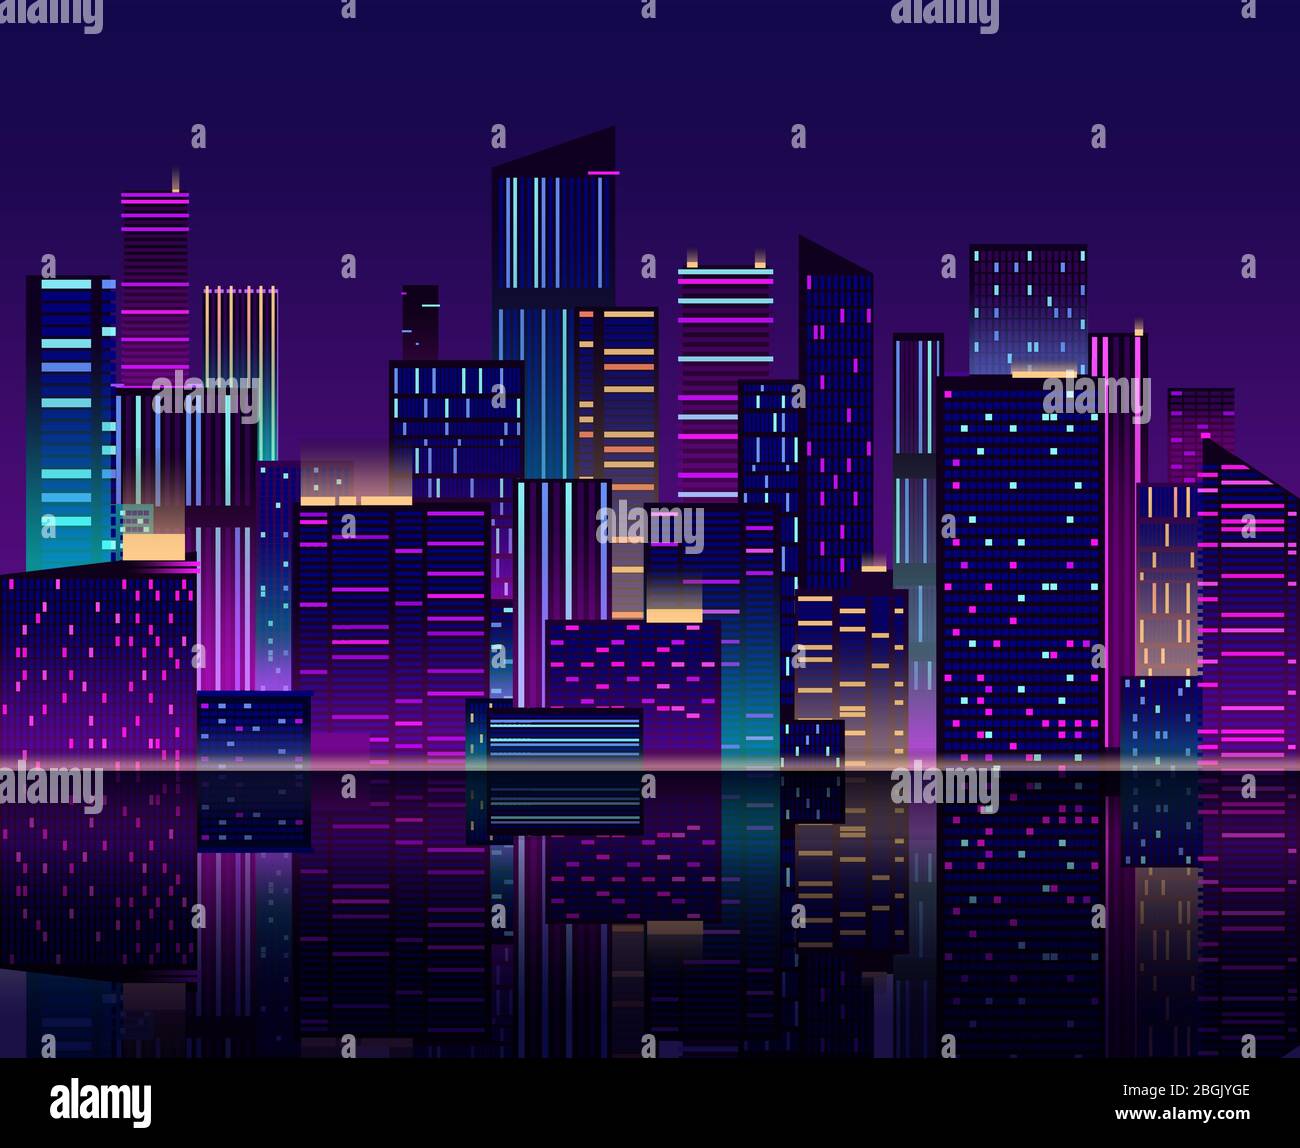 Night city skyline. Skyscraper with neon lights. Urban cityscape with buildings. 80s retro vector background. Panoramic city skyline, architecture cityscape scenery illustration Stock Vector